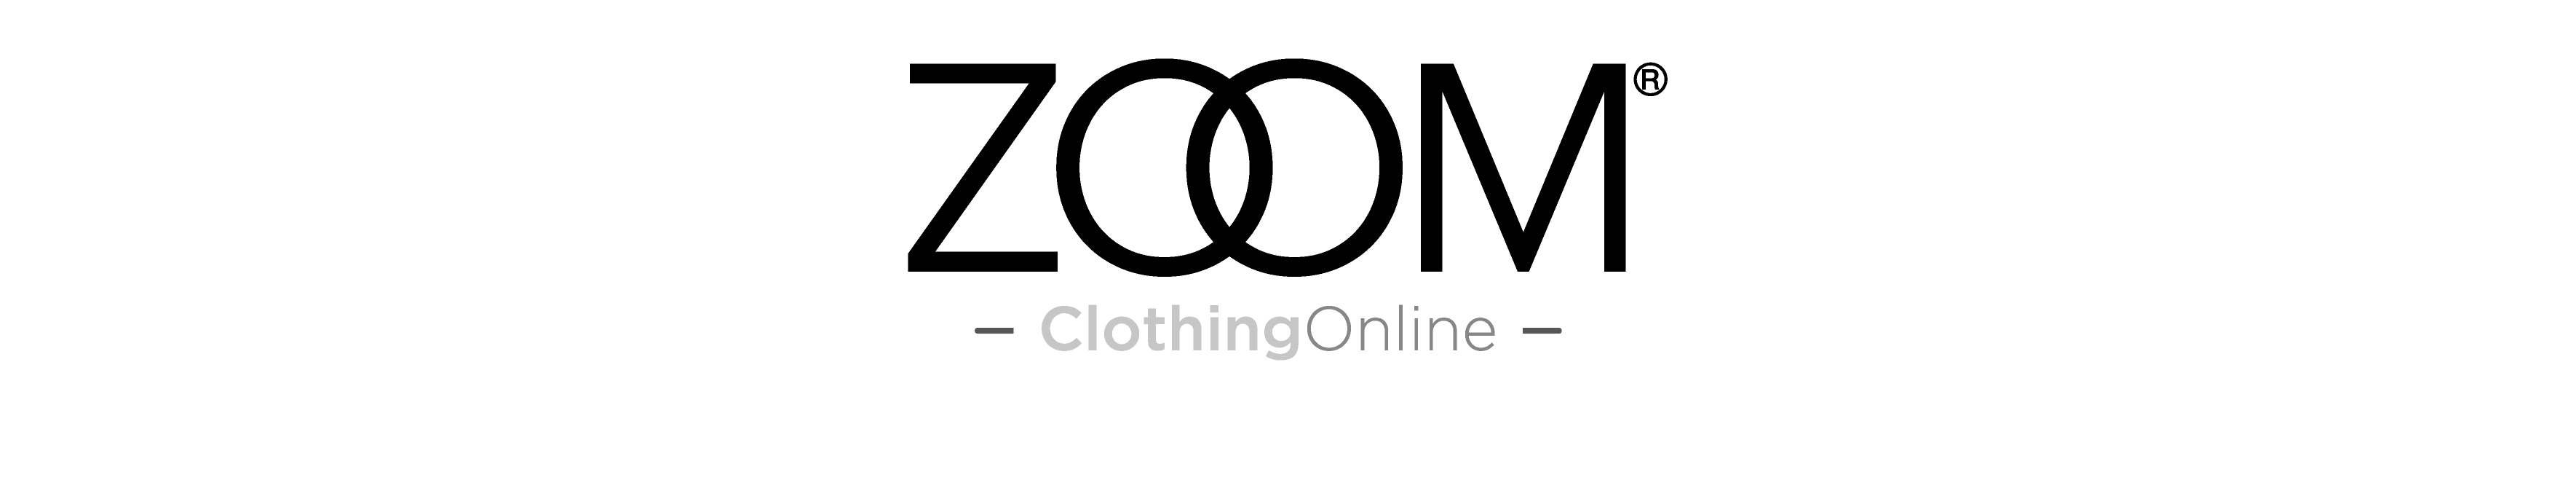 Zoom Logo - About Clothing Company